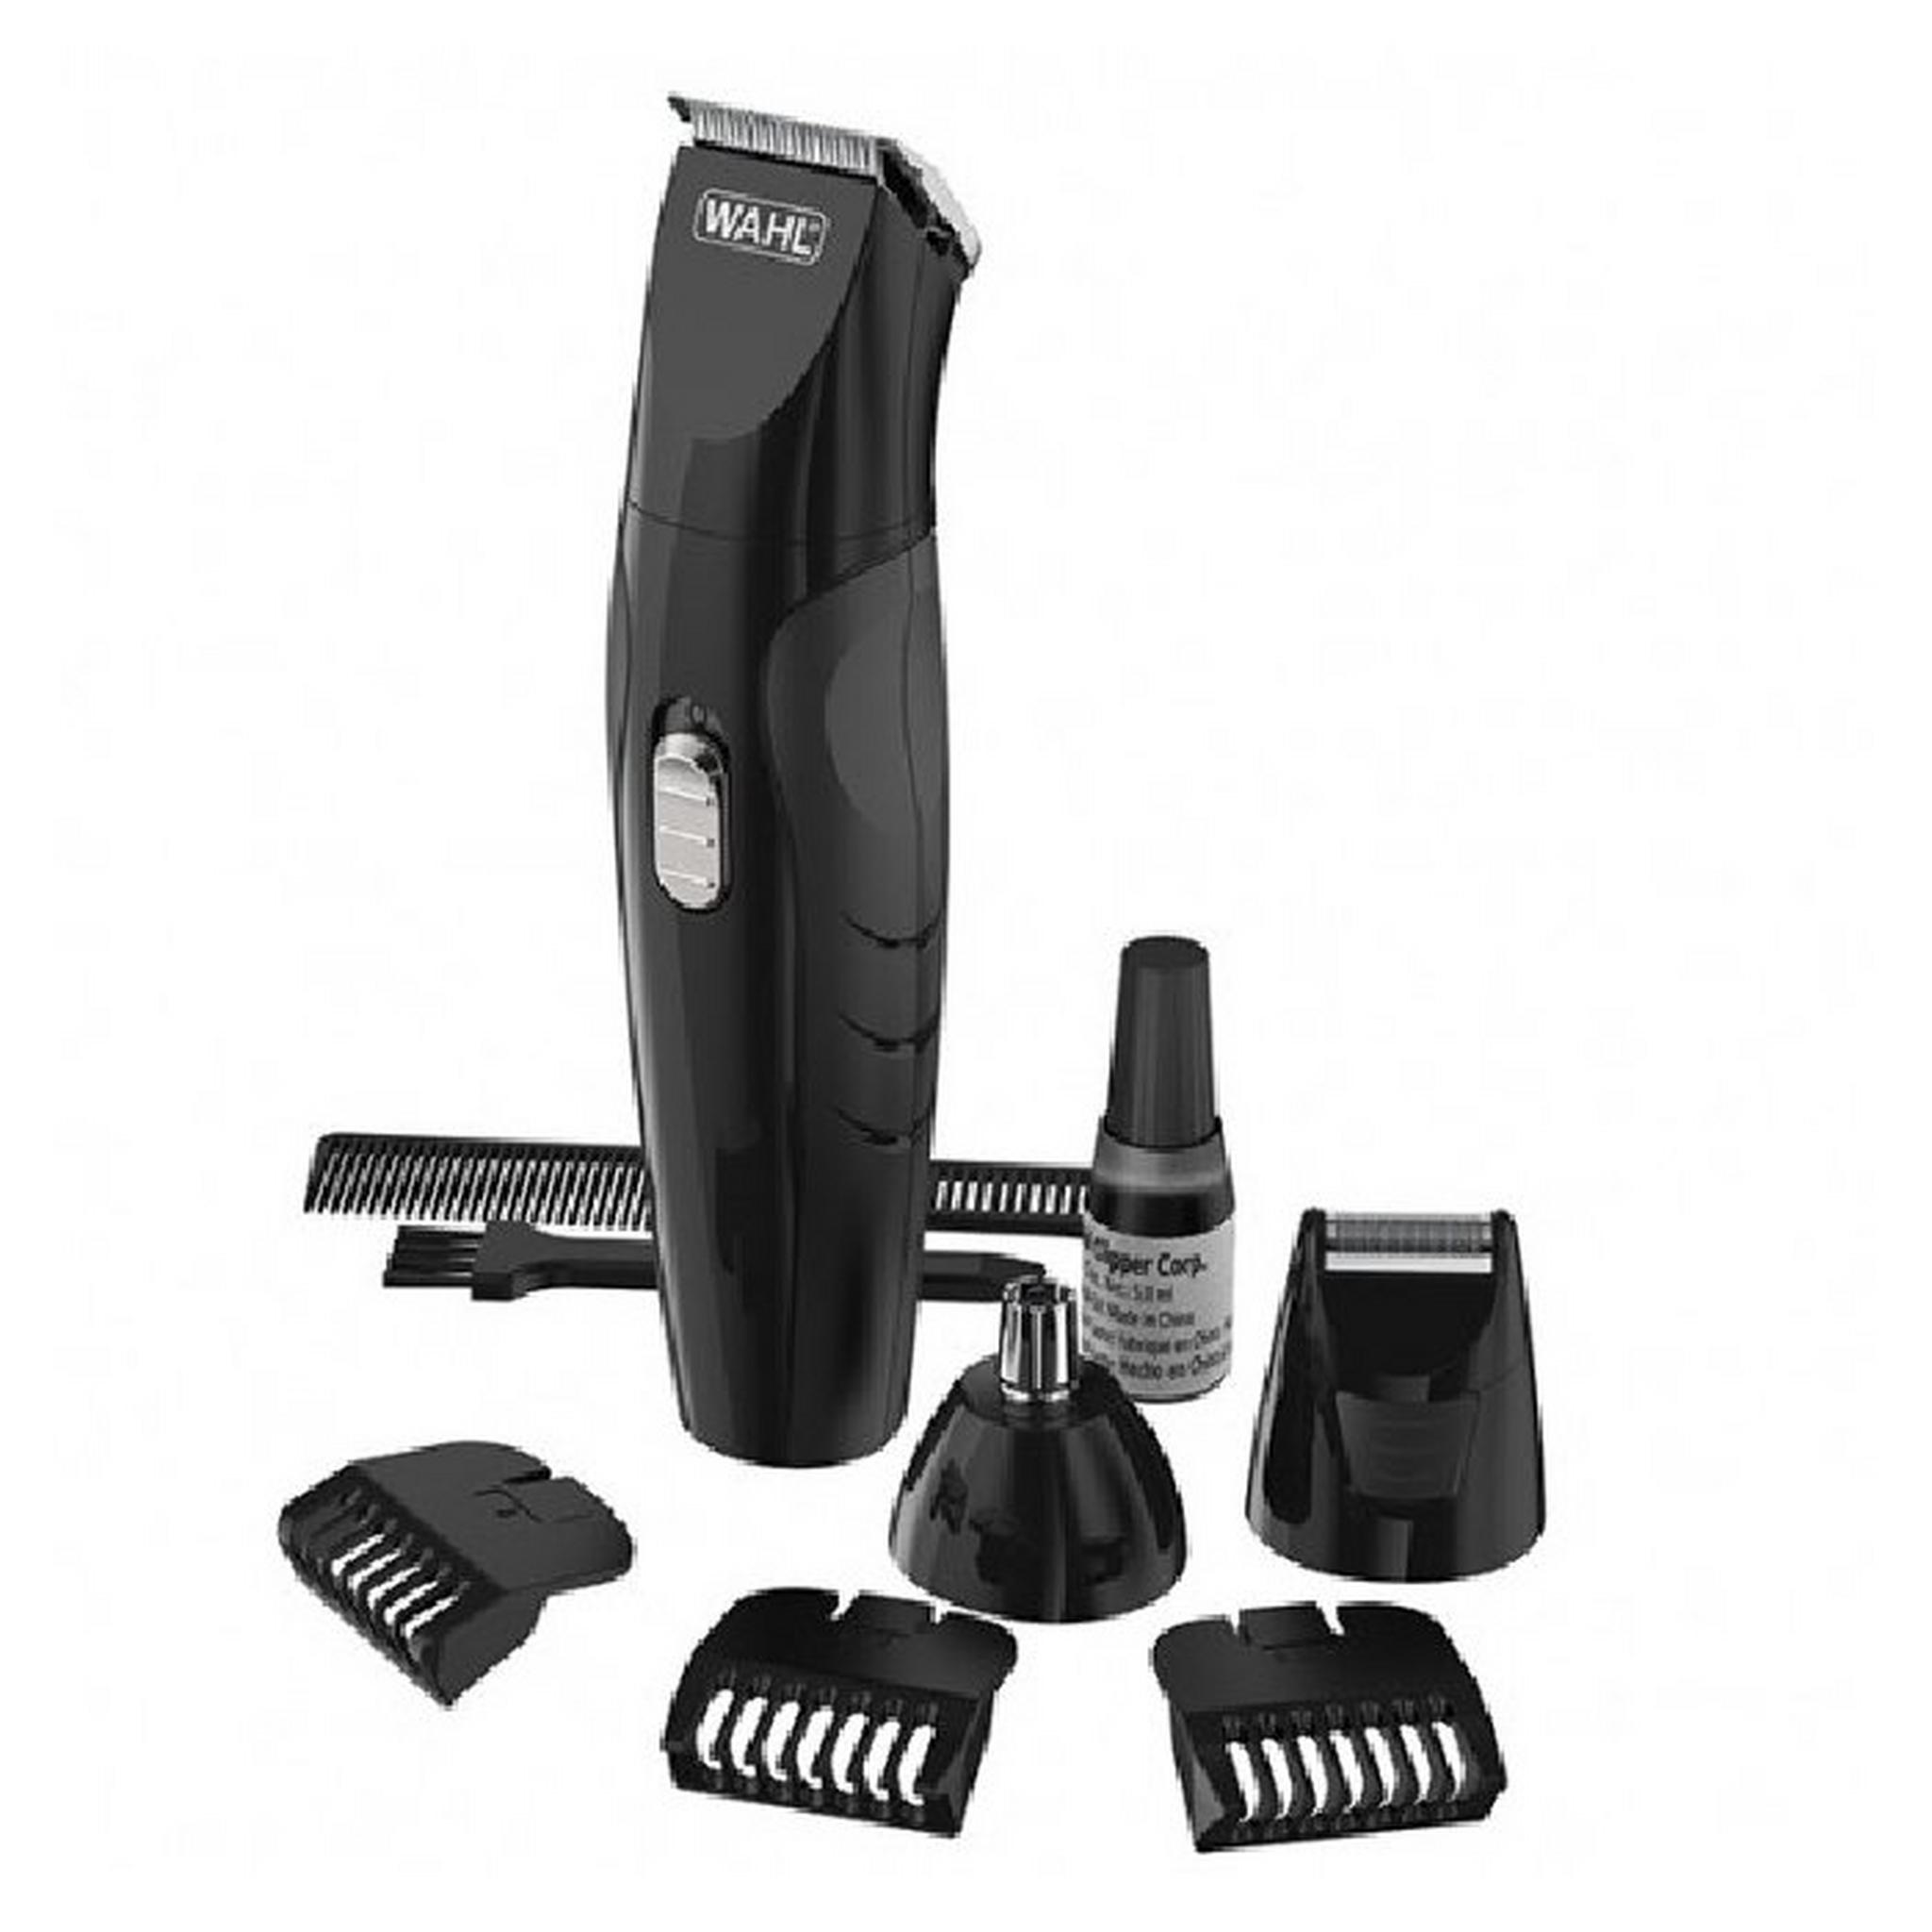 Wahl Rechargeable Grooming Kit - 09685-017